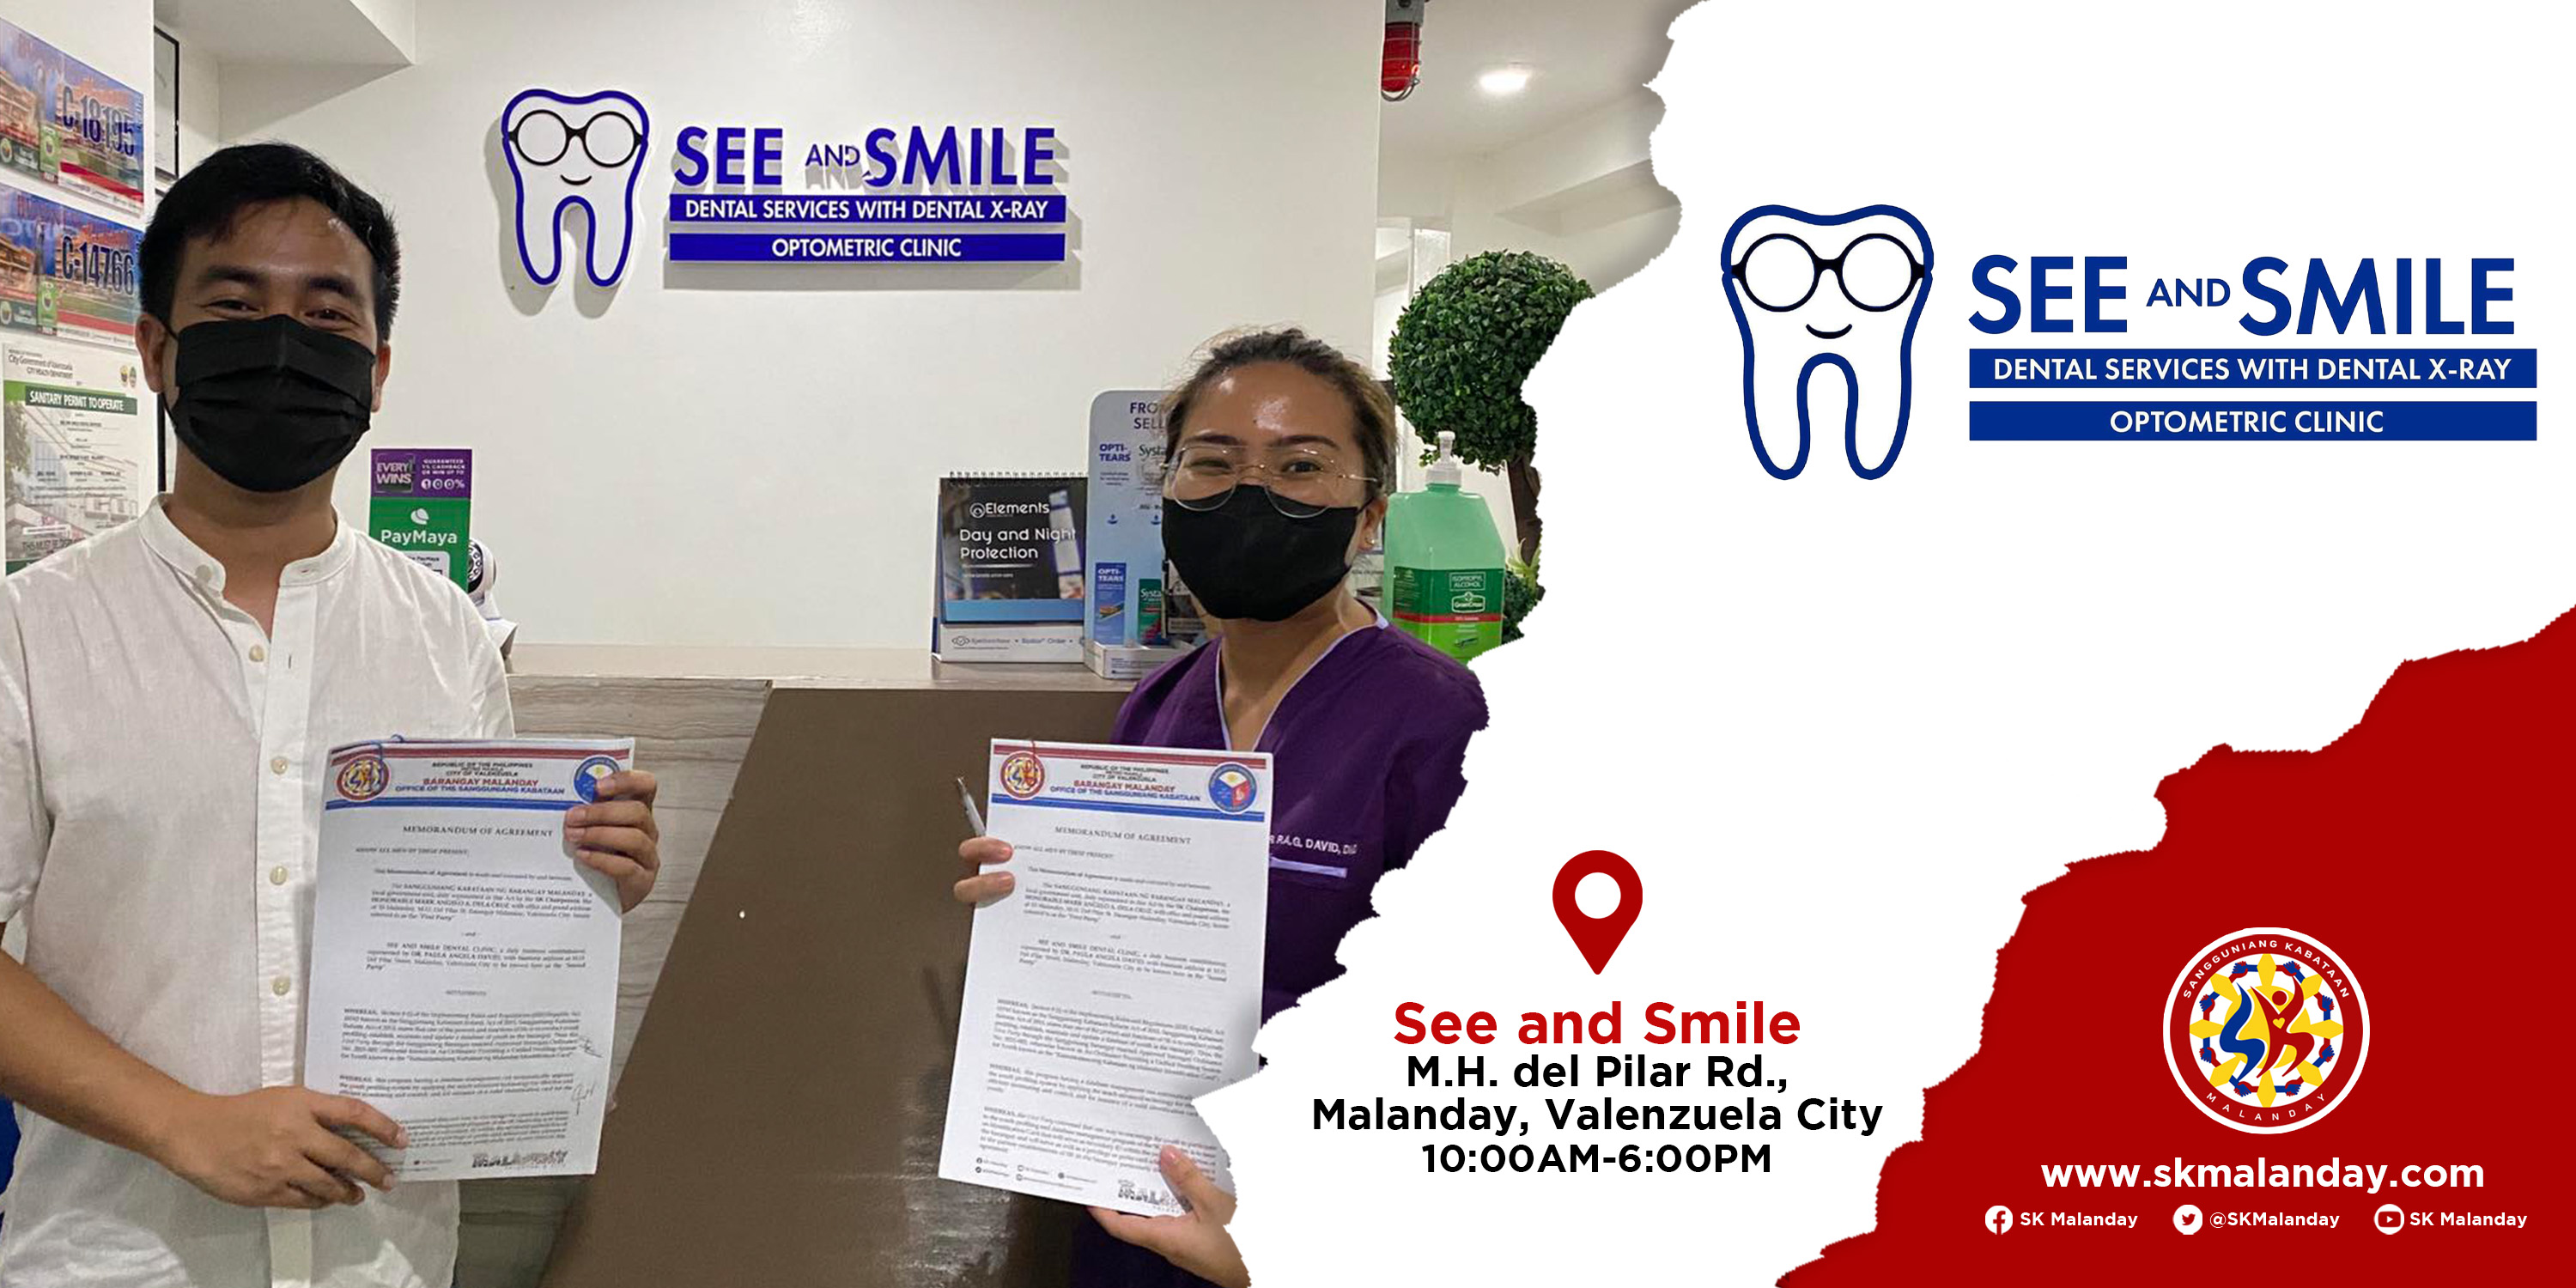 SEE AND SMILE DENTAL CLINIC AND OPTOMETRIC CLINIC